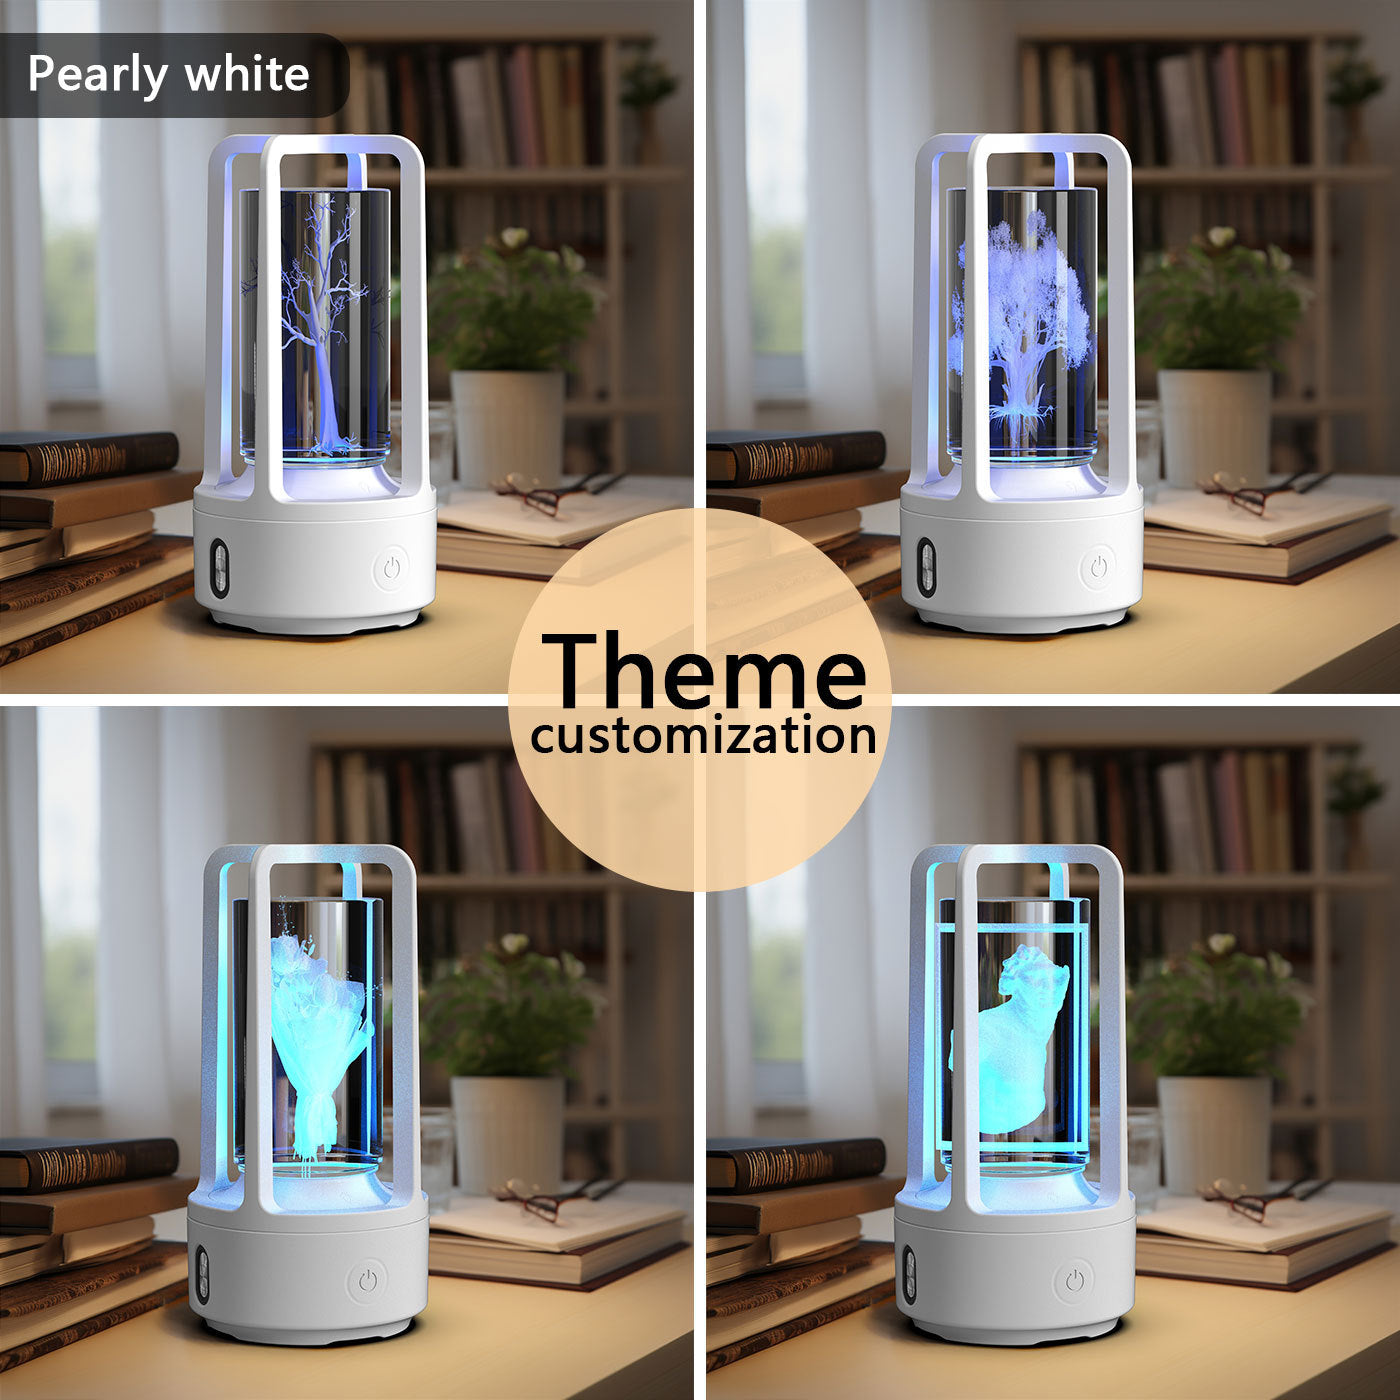 Audio Acrylic Crystal Lamp And Bluetooth Speaker Valentine's Day The Khan Shop